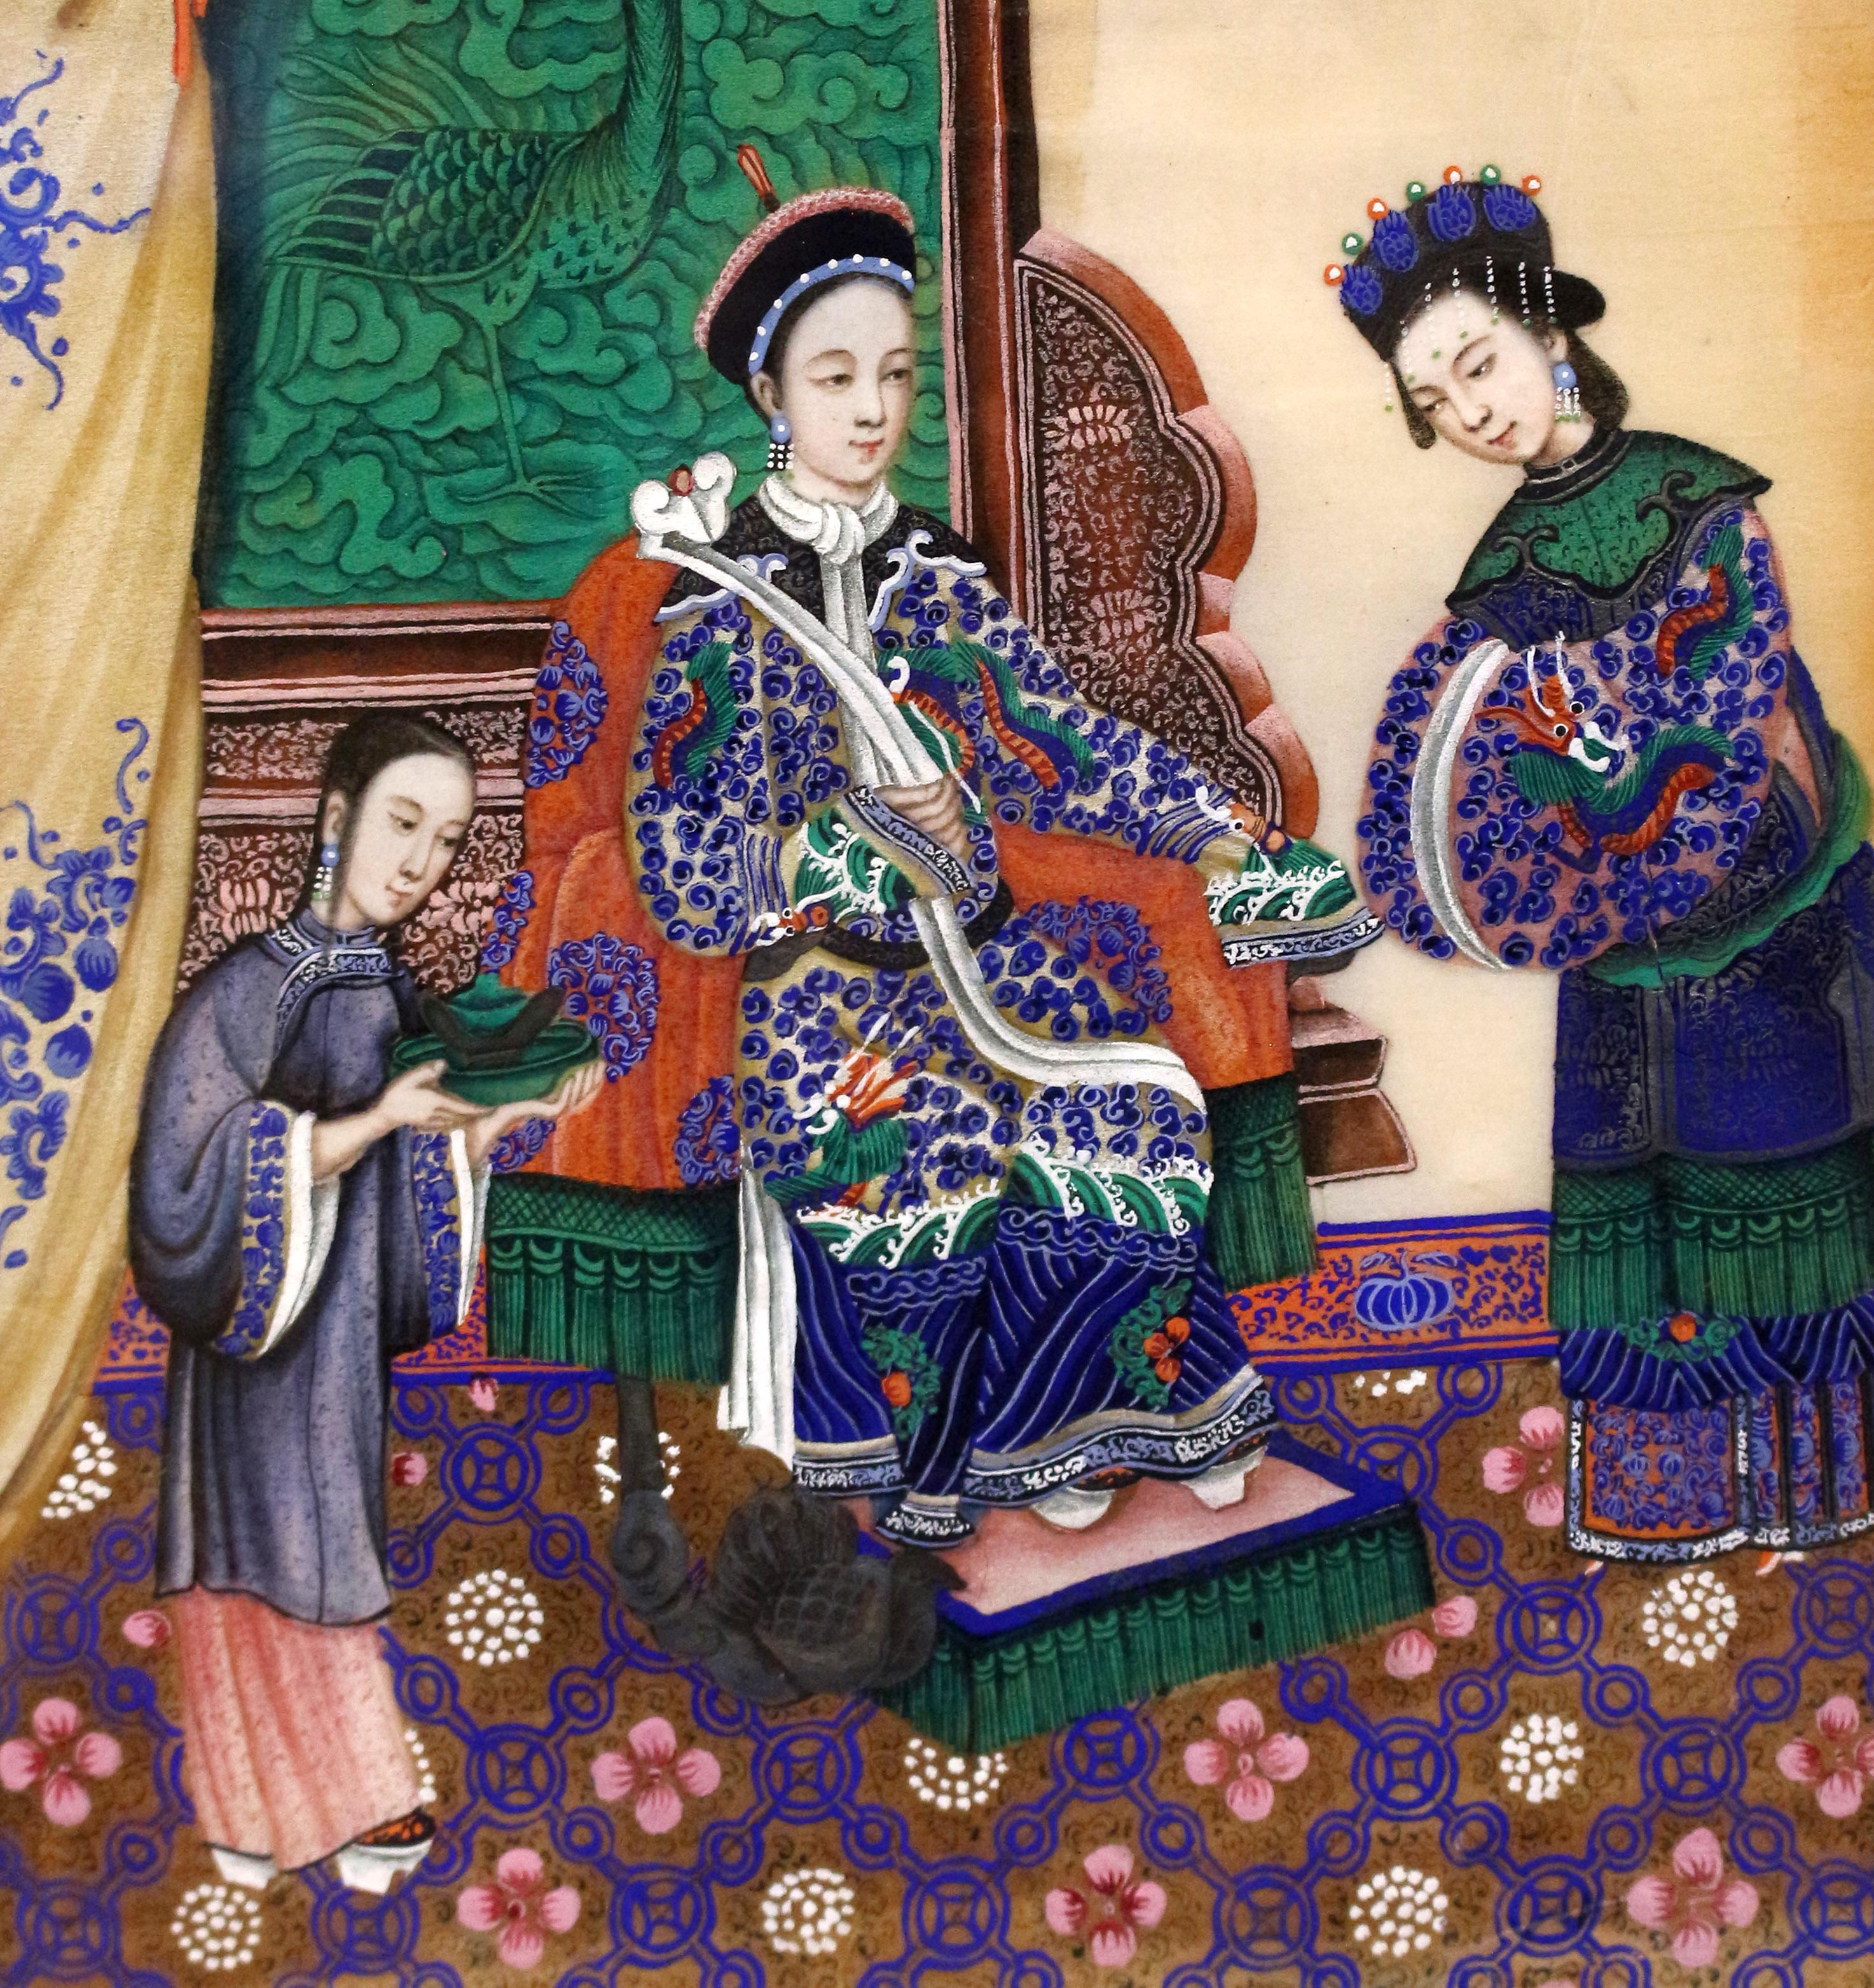 Mid-19th century pair of Chinese portraits painted on rice or pith paper. An official of the Qing dynasty and his wife, set in lushly detailed interiors. From symbols of authority to remarkable interiors, these are superb gouache paintings. Each